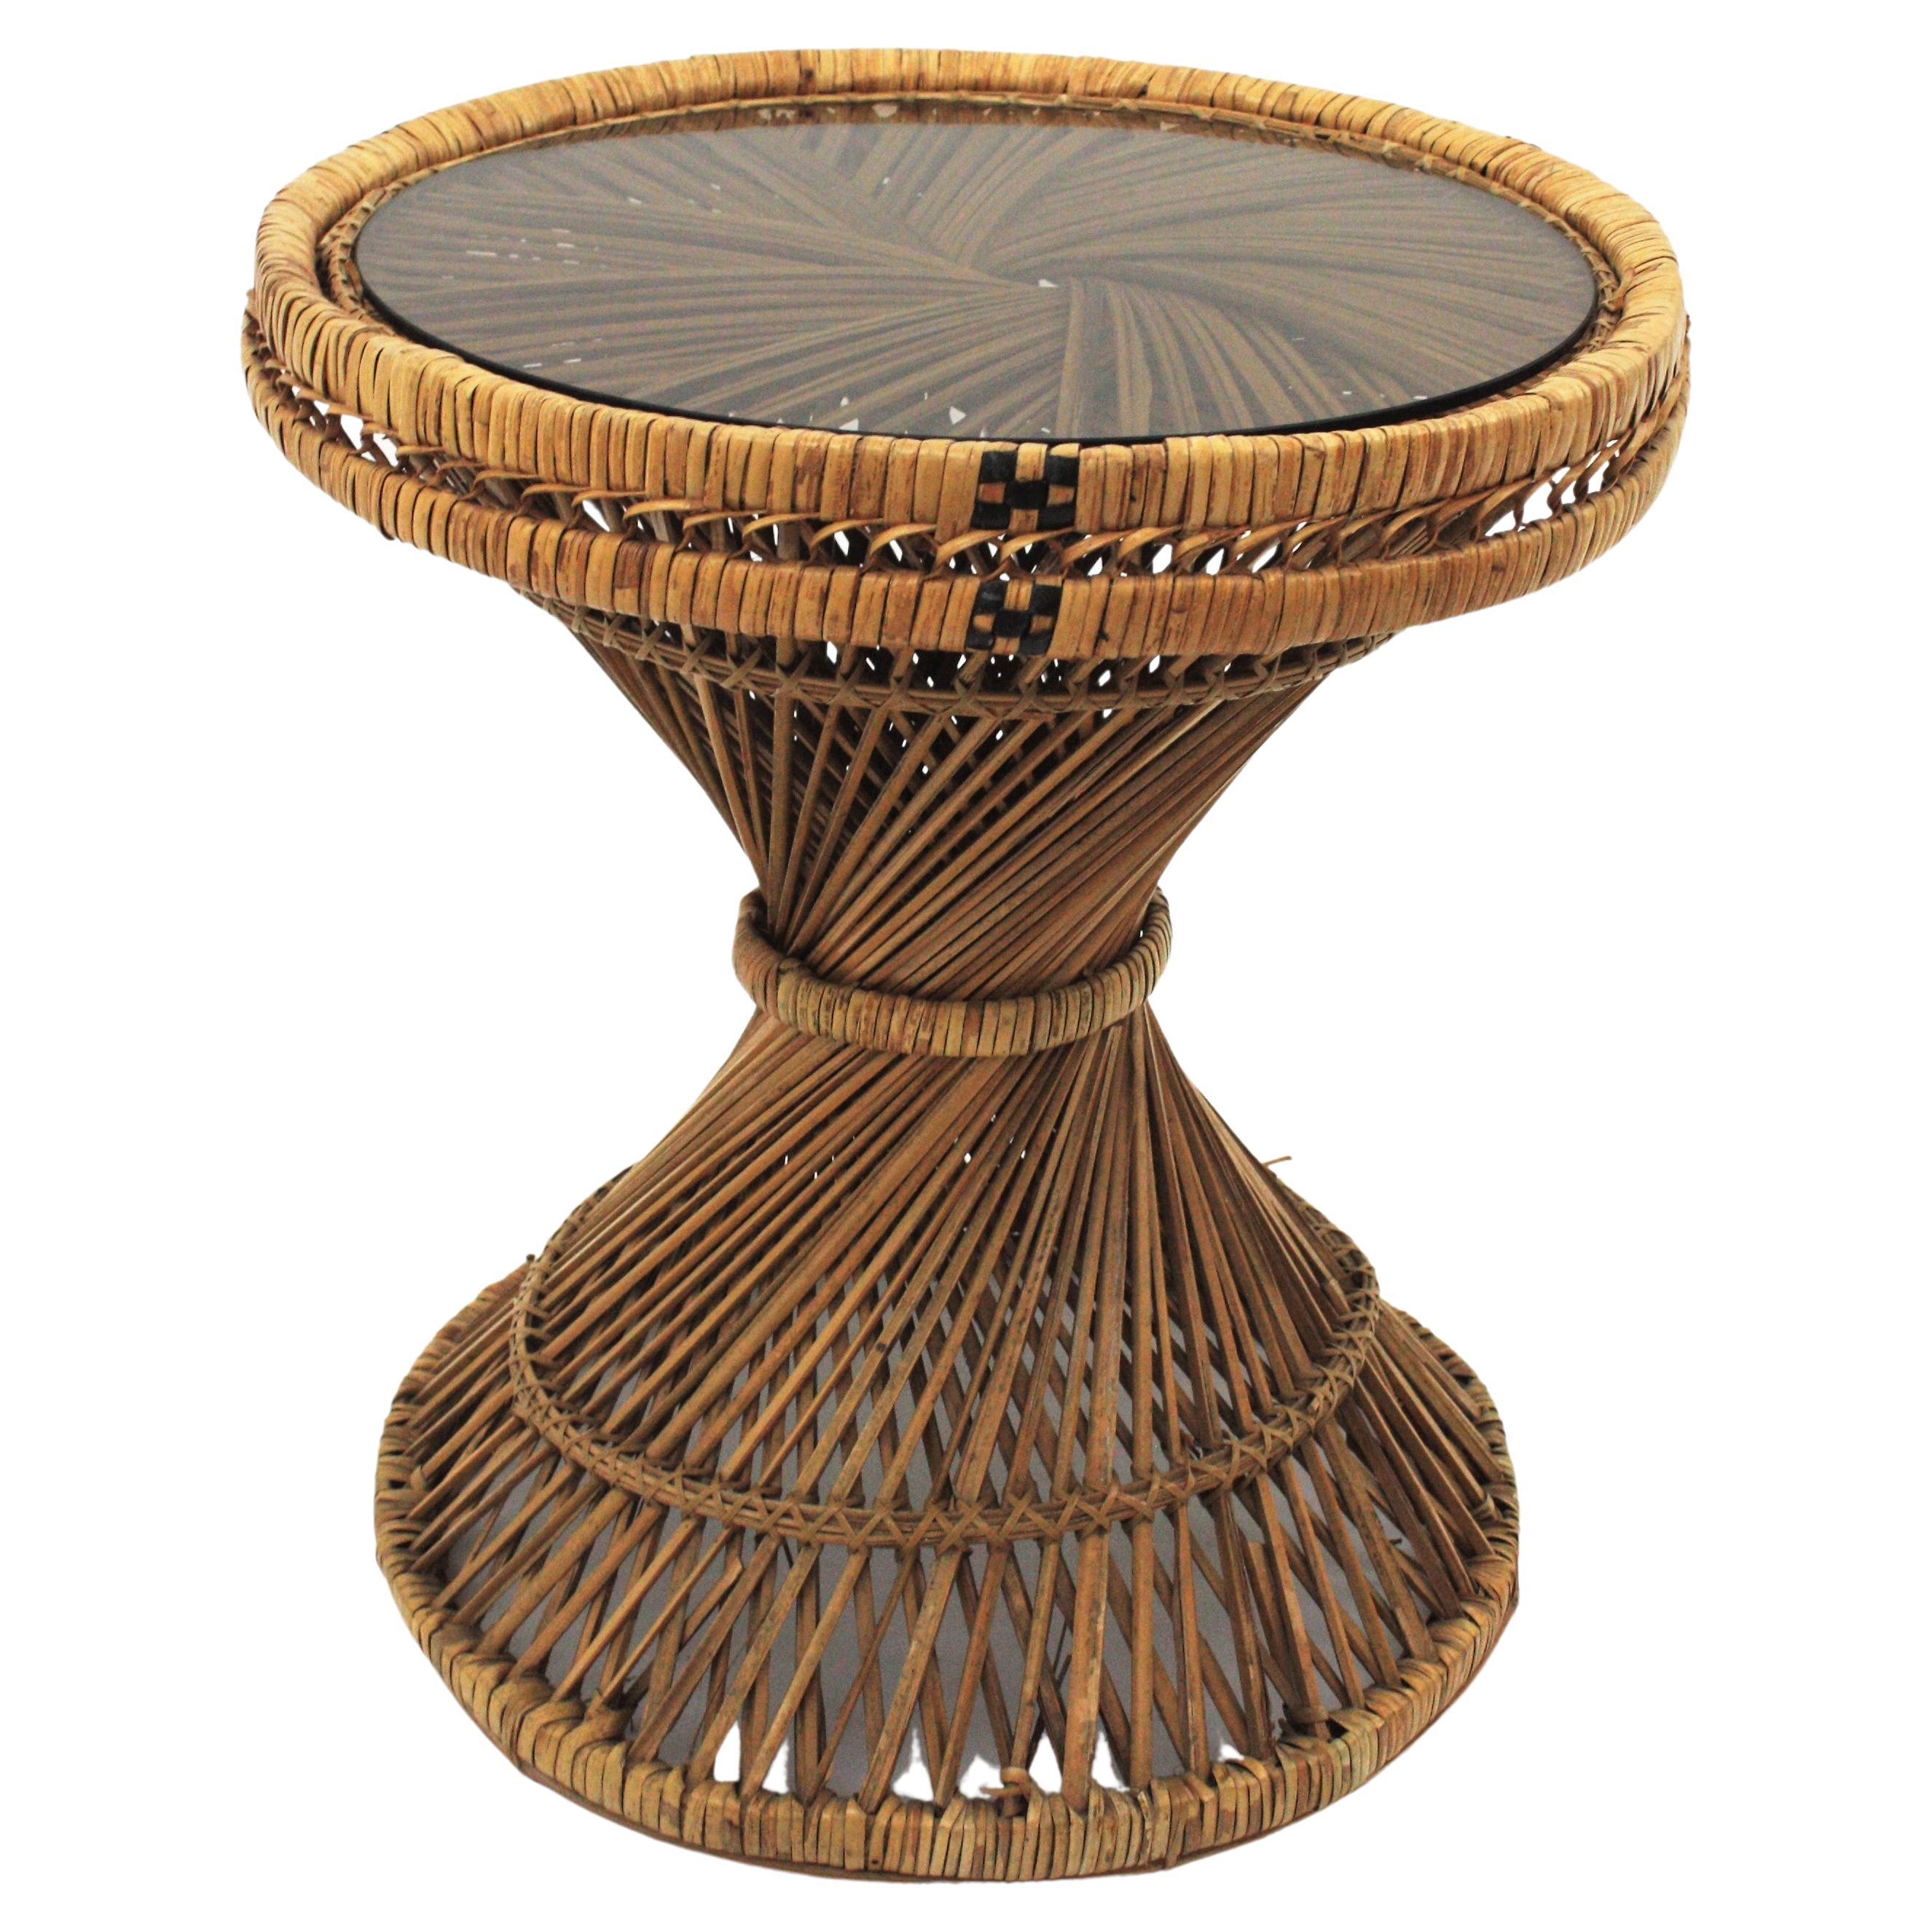 Round coffee table handcrafted in wicker and rattan in the manner of the Emmanuelle chair, Spain, 1960s.
This lovely round low table features an intricate of rattan and wicker canes with twisting at the central part.
Its design with a round top